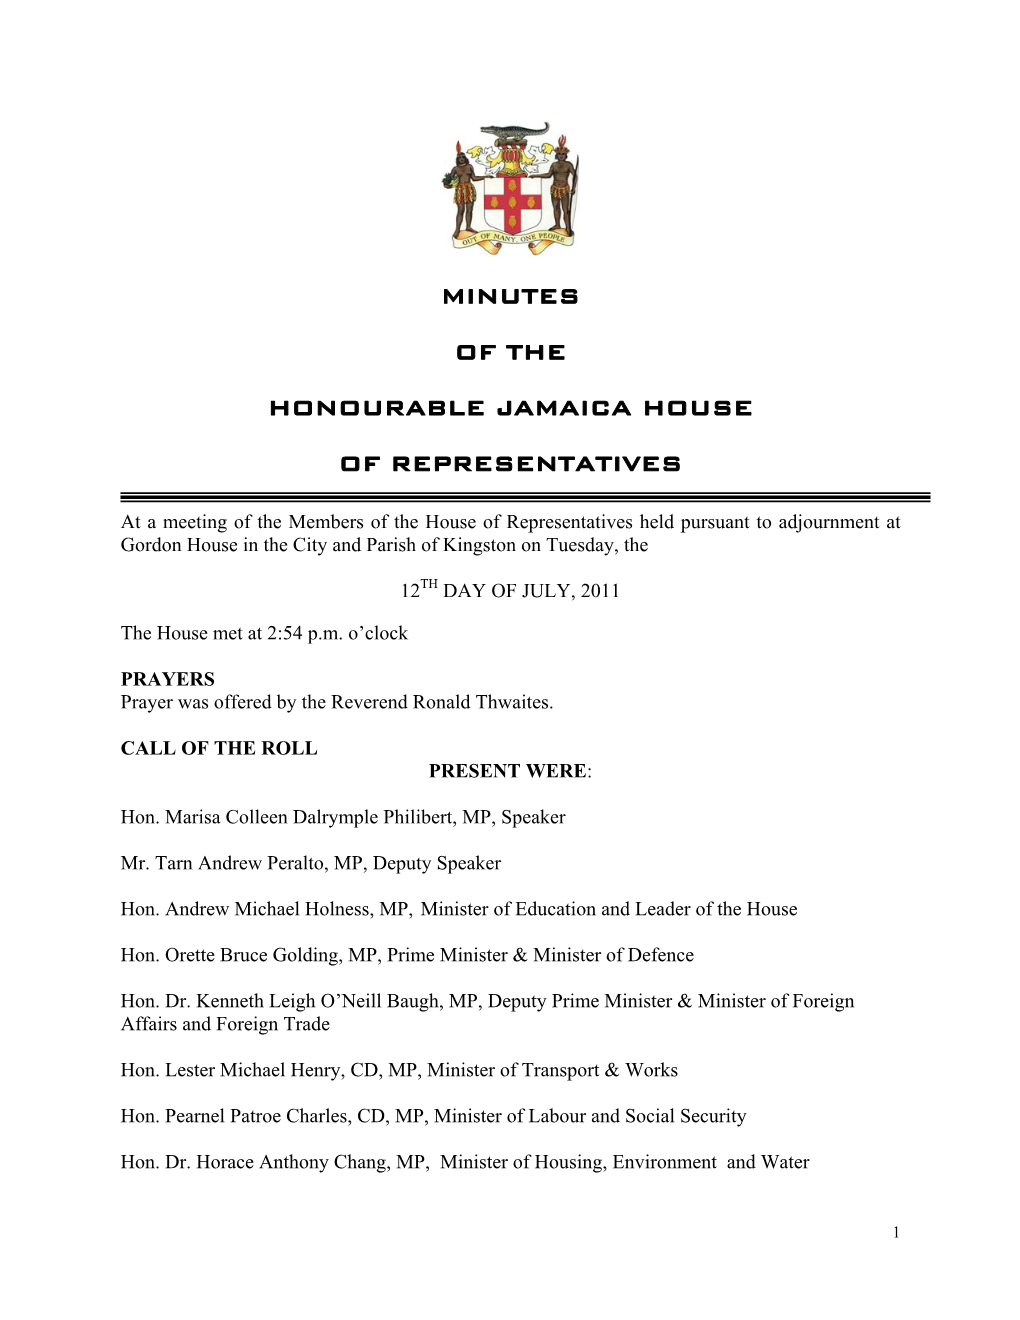 Minutes of the Honourable Jamaica House of Representatives